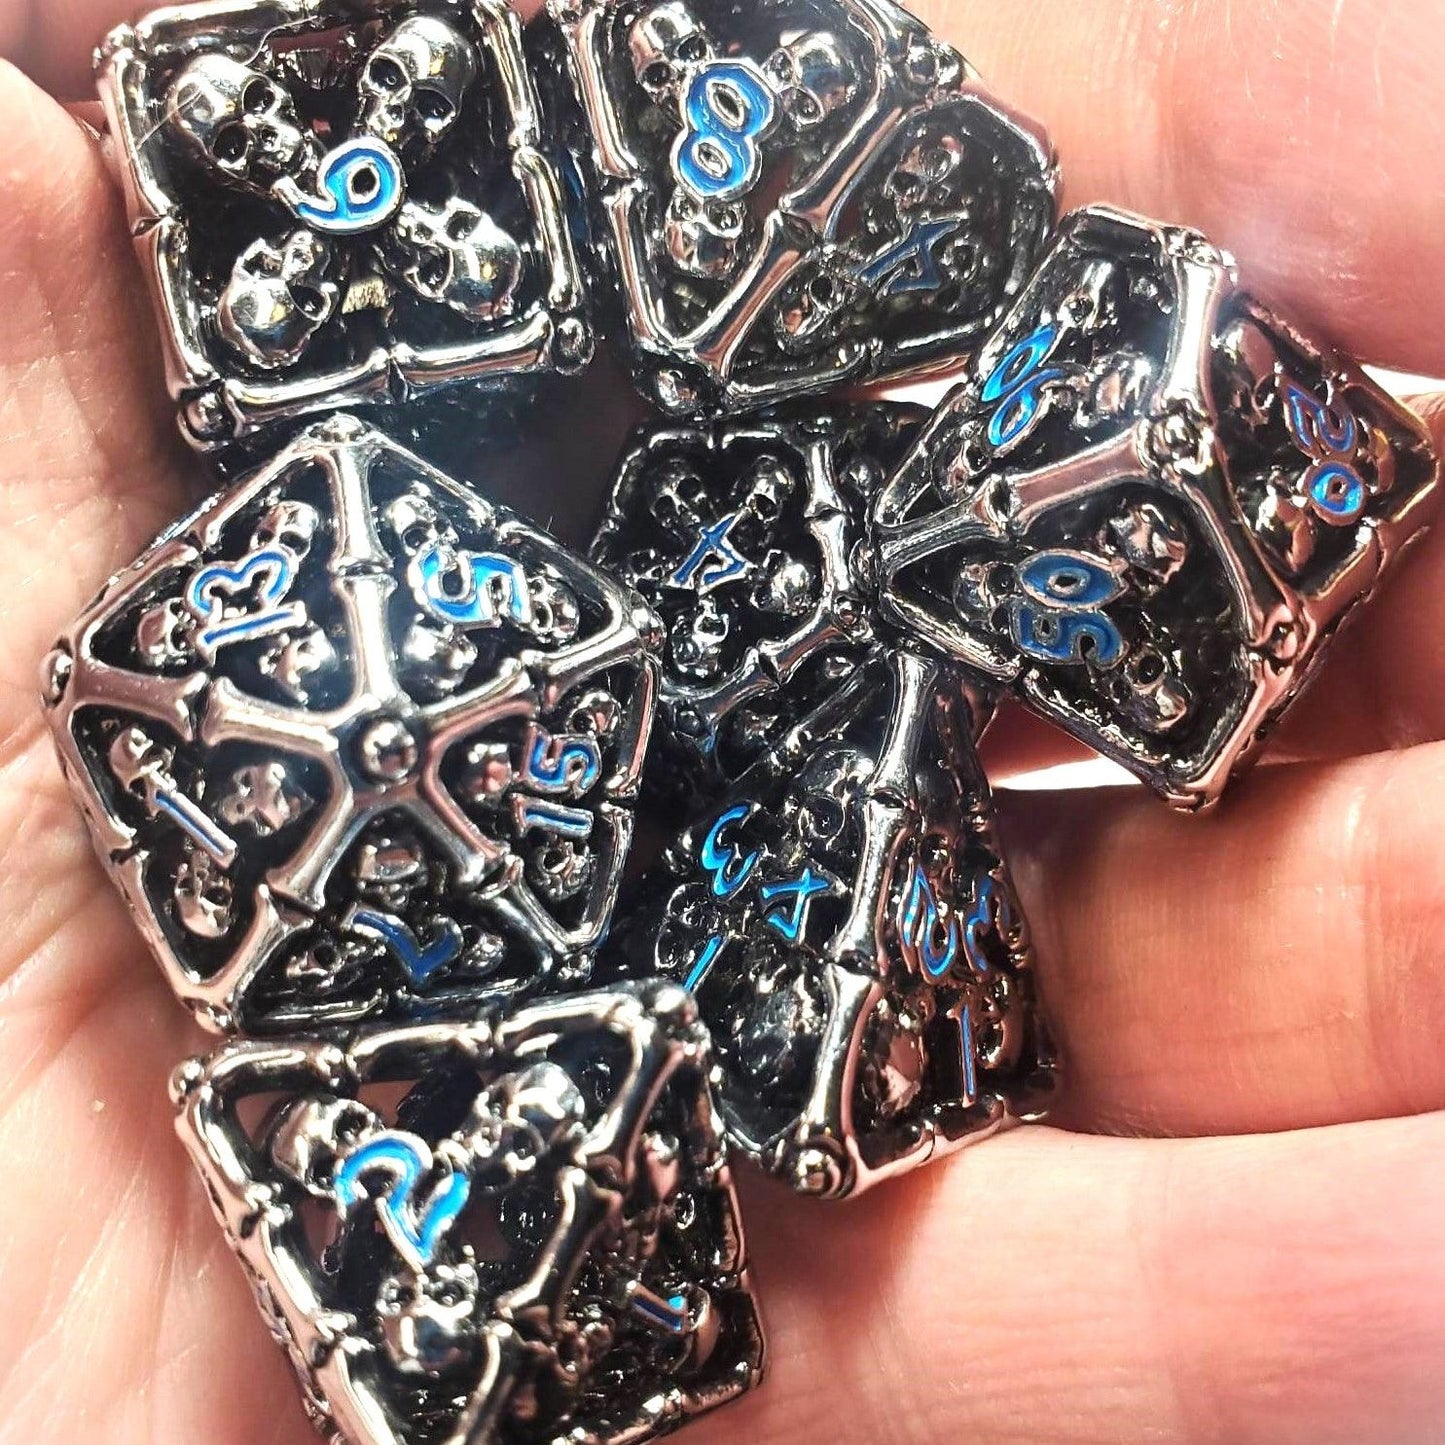 Hollow Bone & Skull Metal Dice Set with Blue Numbers